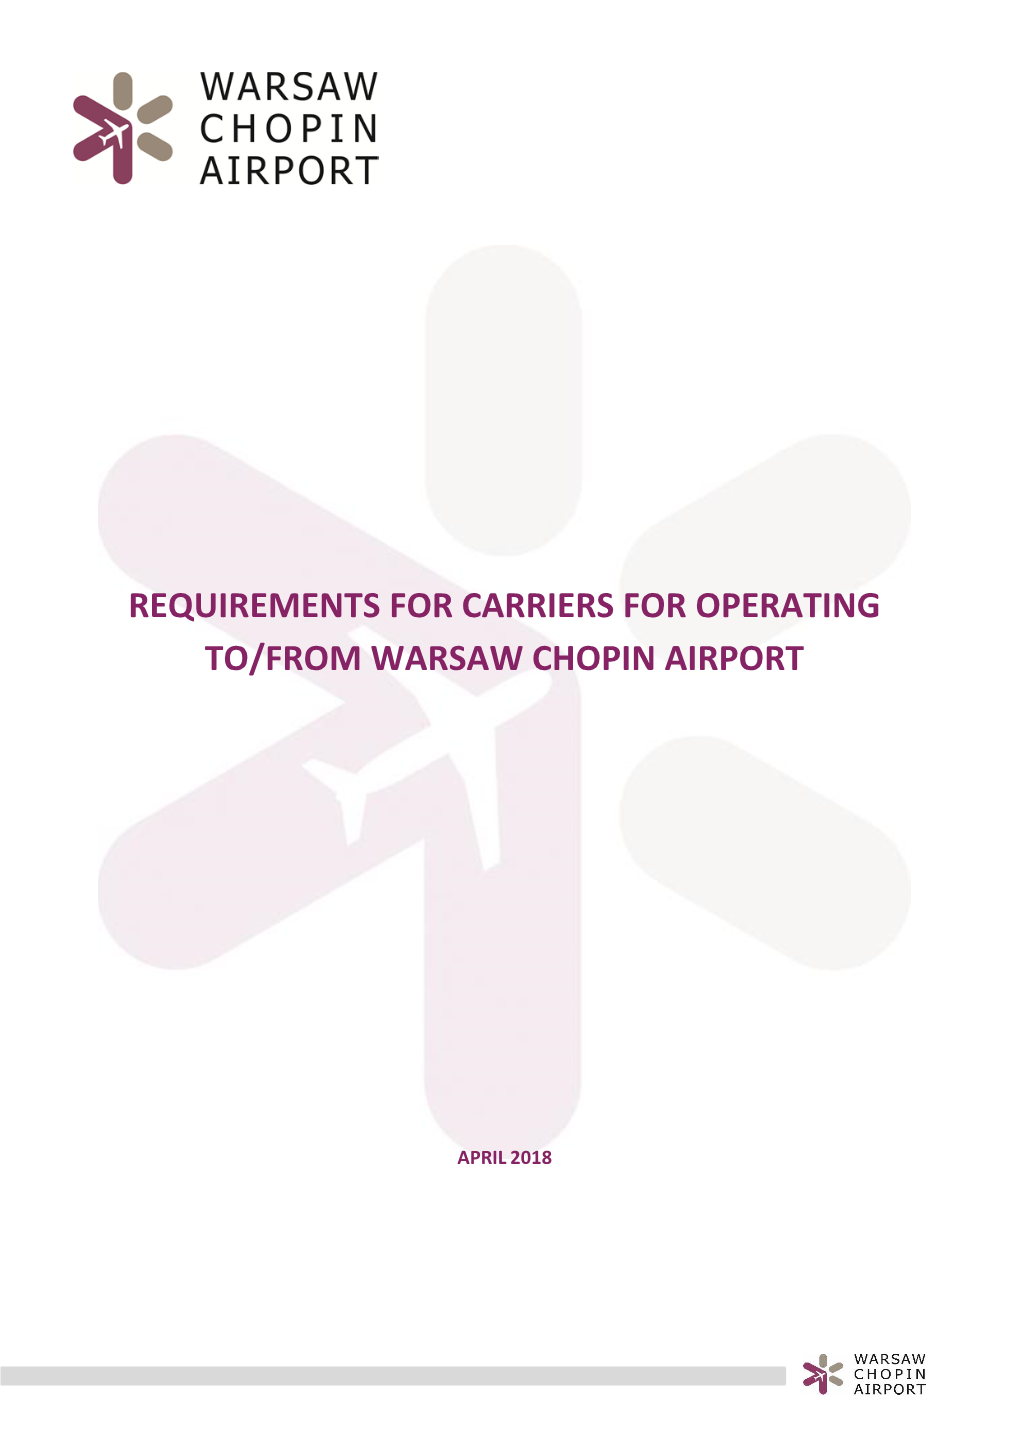 Requirements for Carriers for Operating To/From Warsaw Chopin Airport